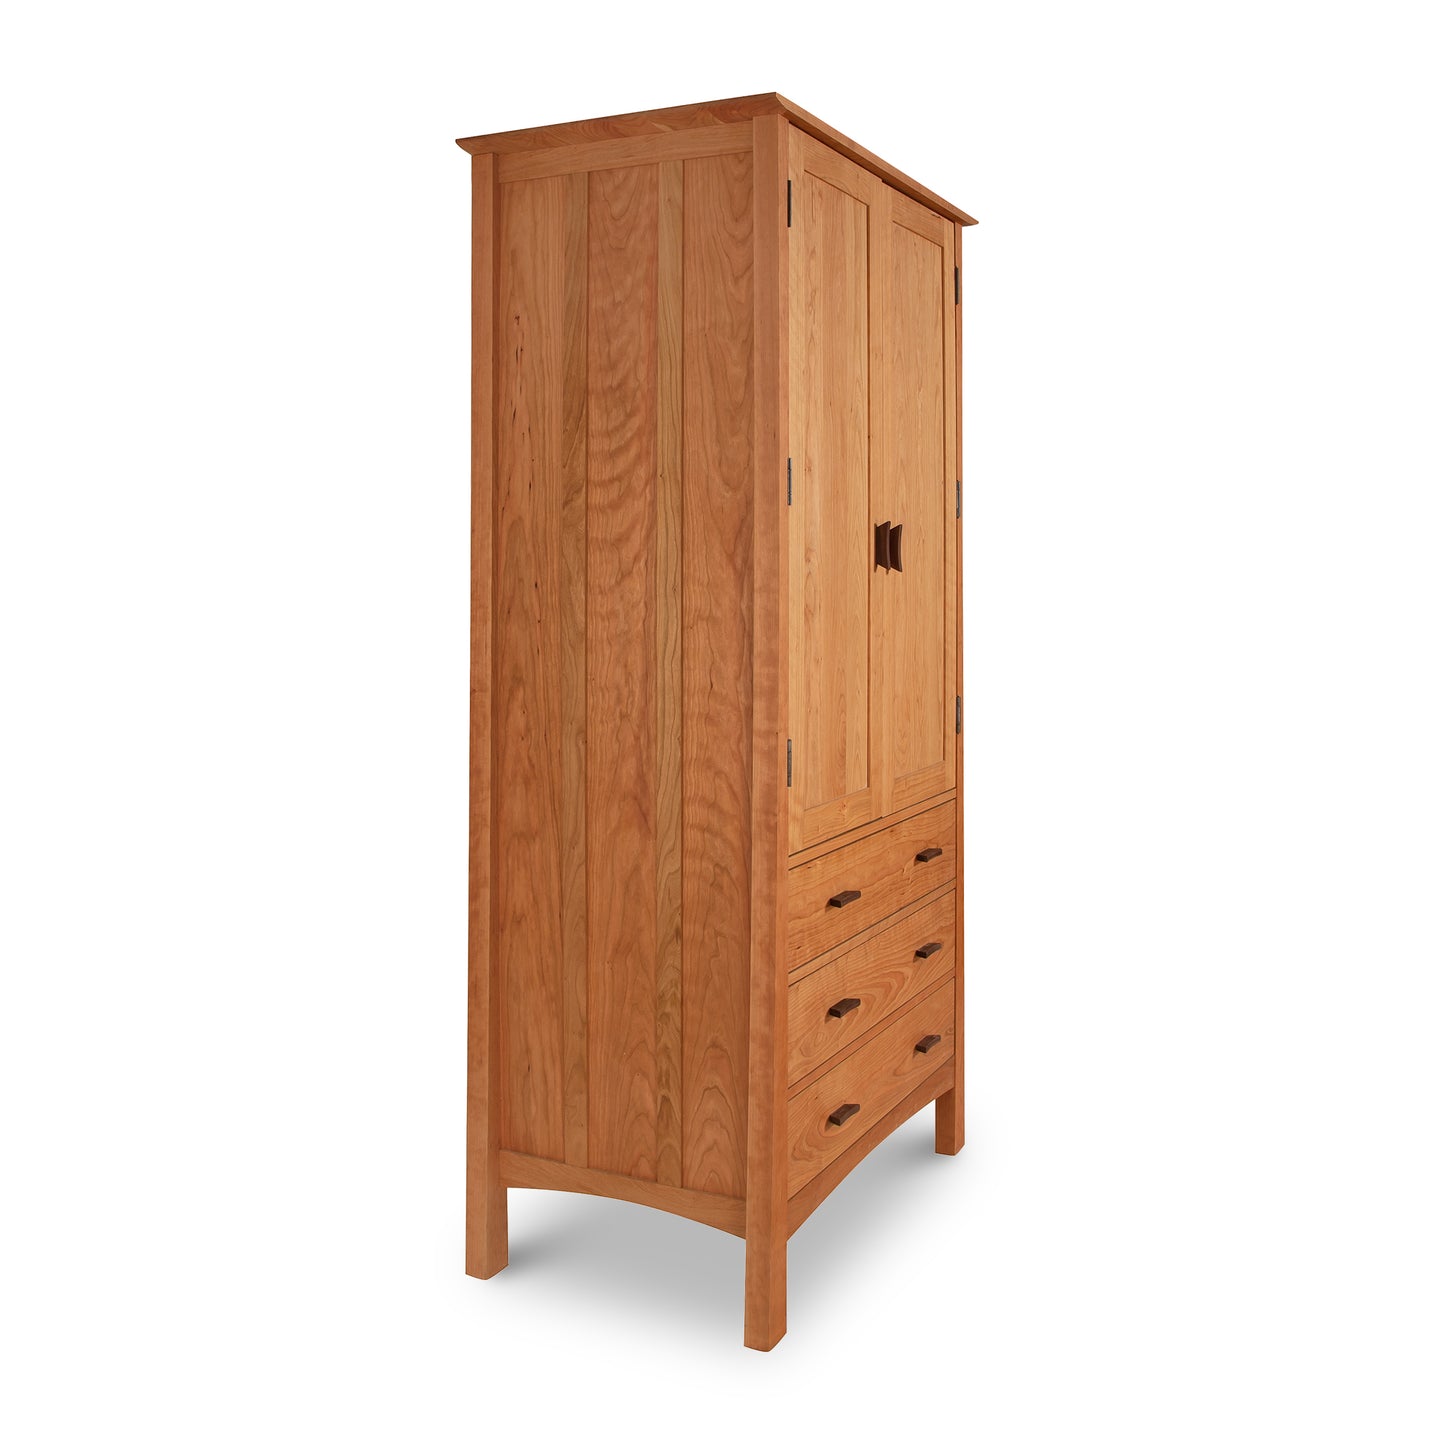 Vermont Furniture Designs Contemporary Craftsman Tall Armoire with a cabinet door on top and three drawers below, isolated on a white background.